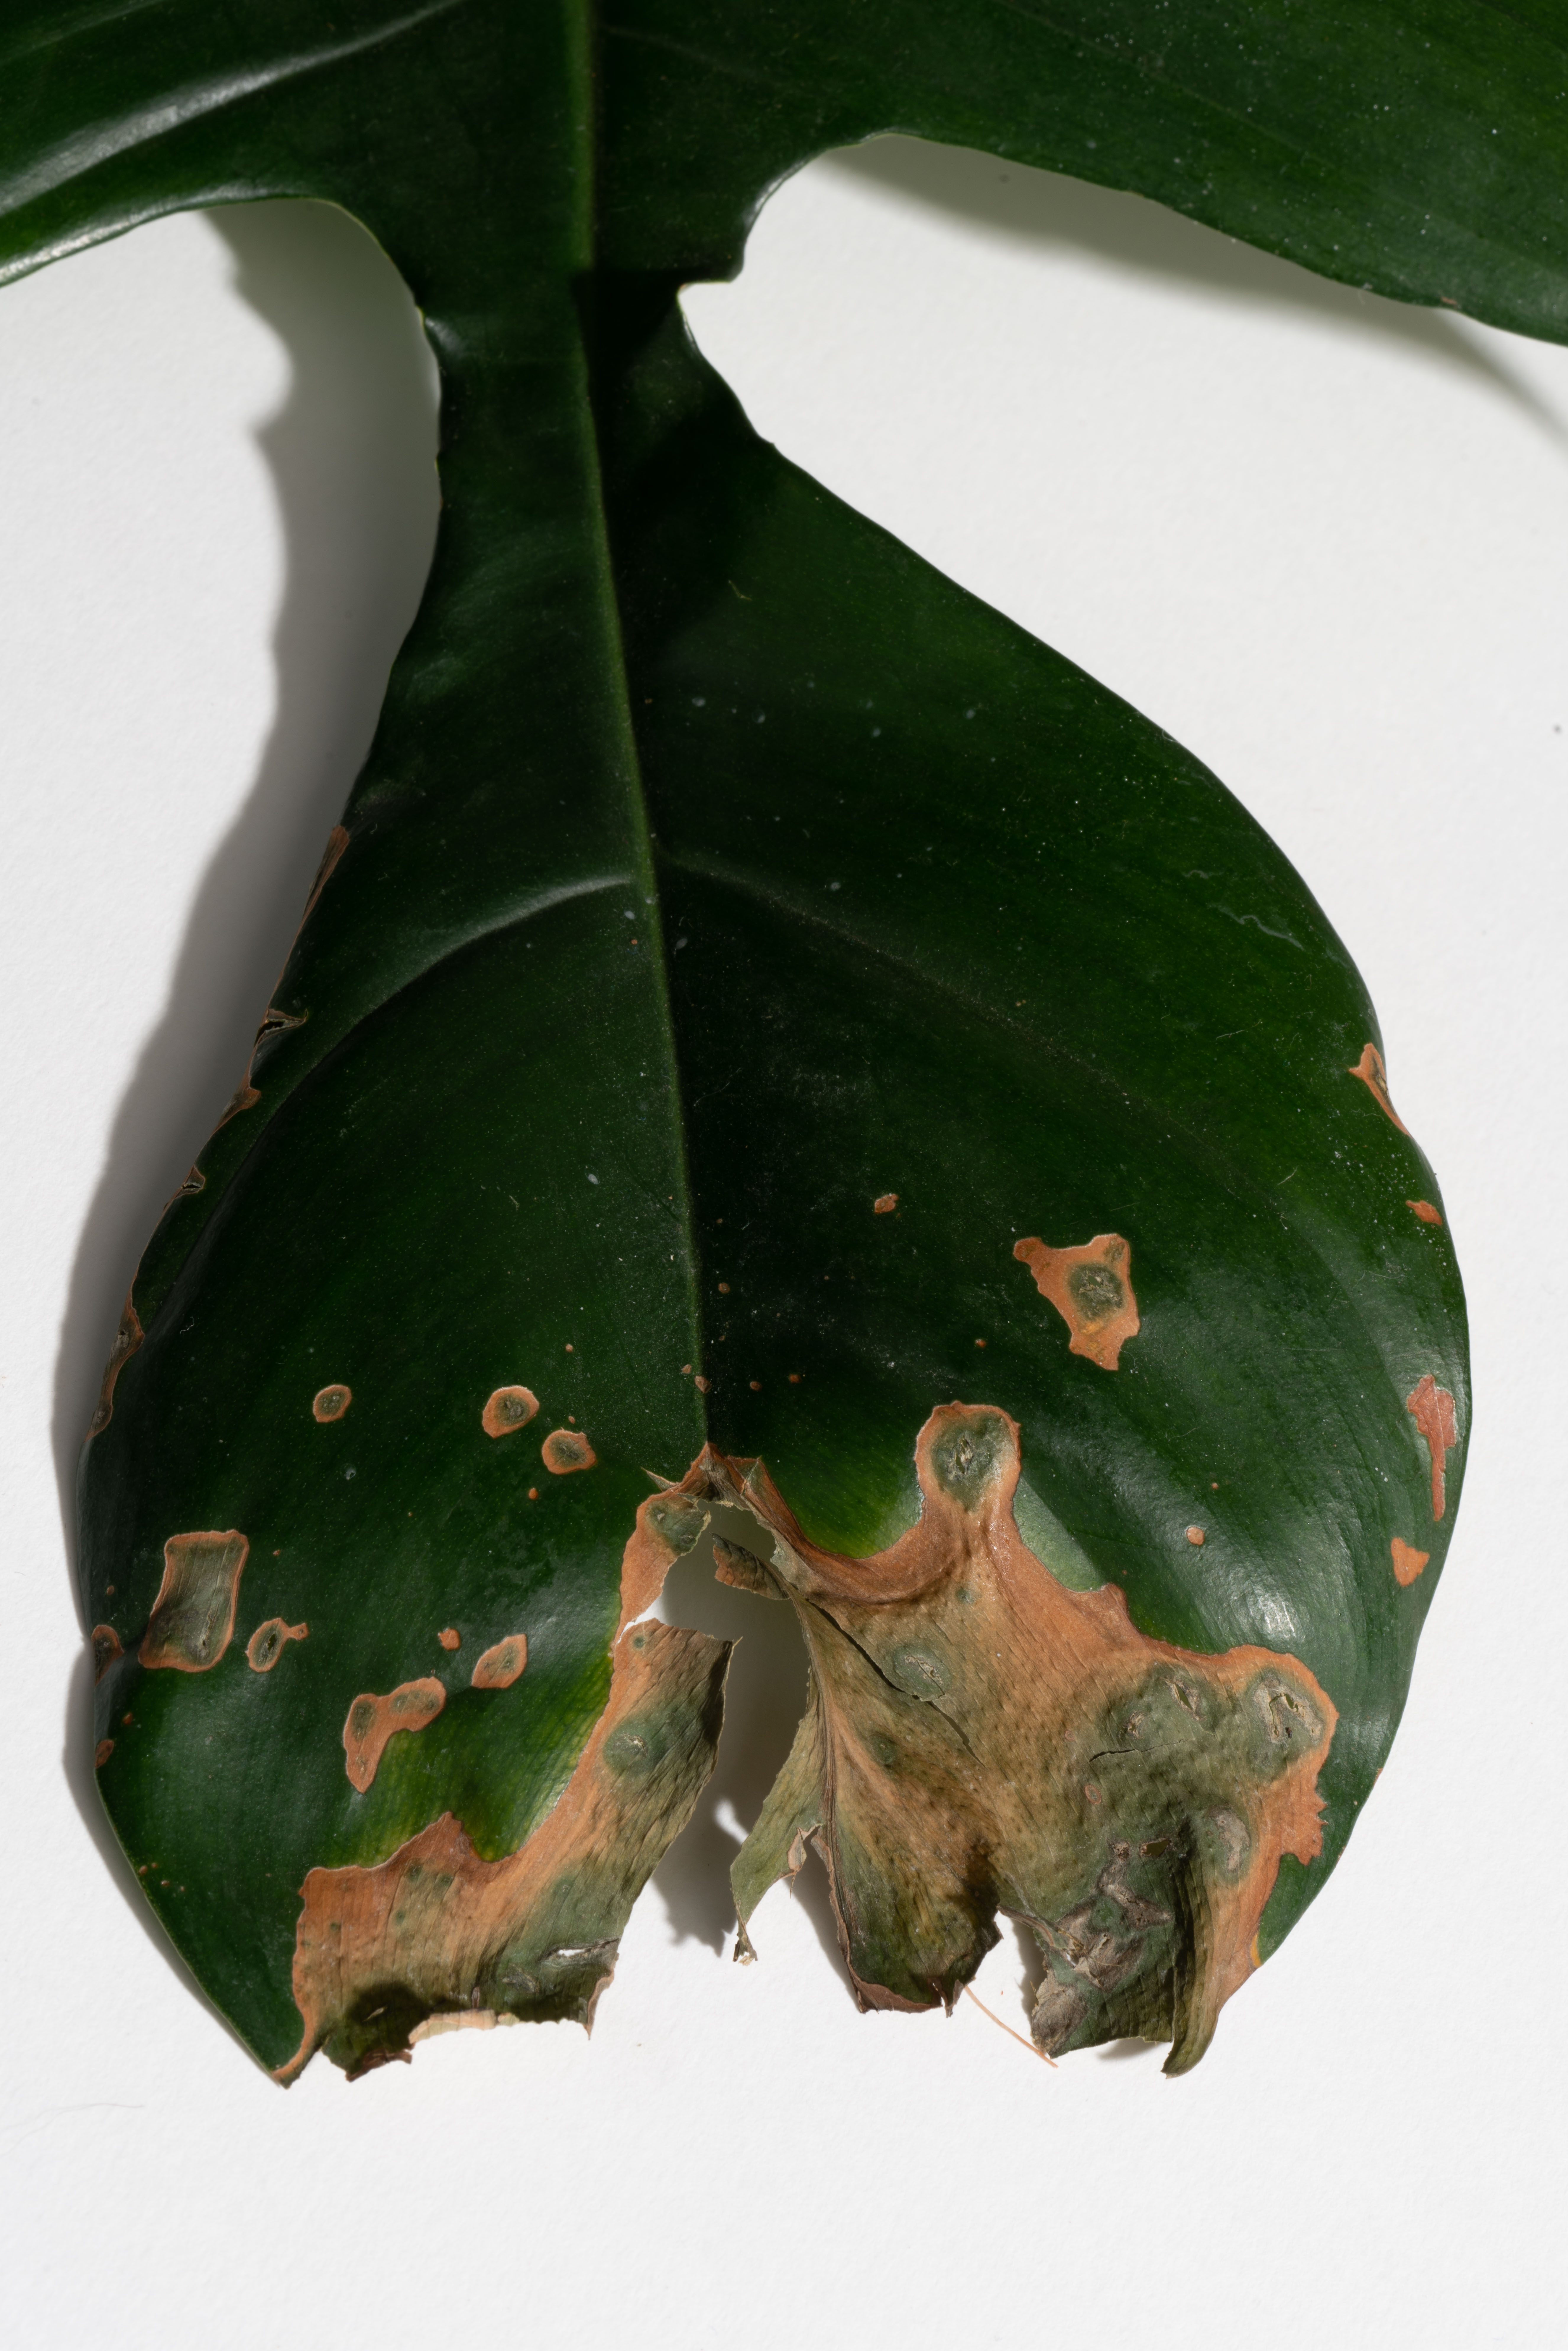 plant leaf with brown spots